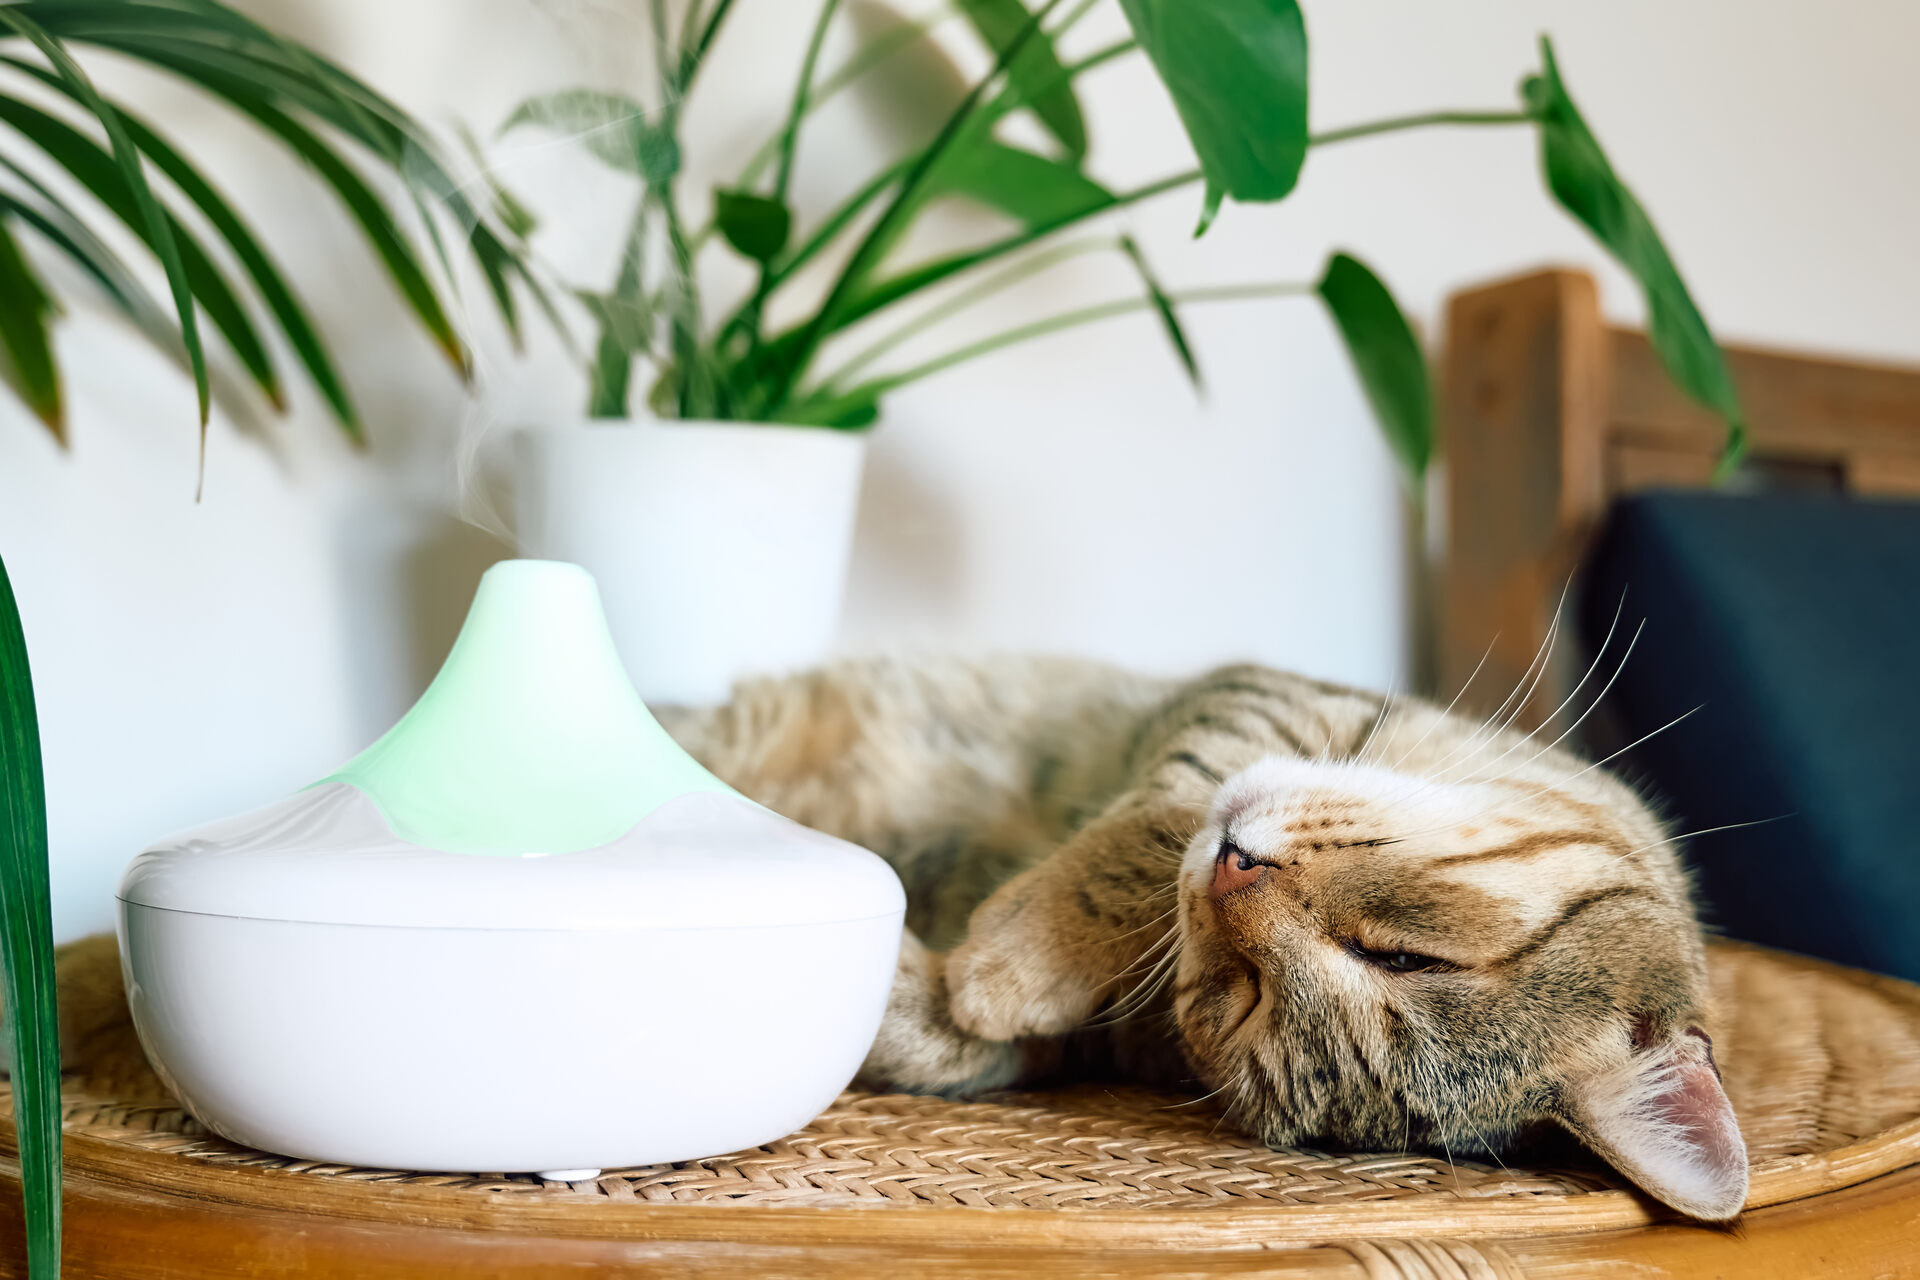 A cat sleeping next to a diffuser